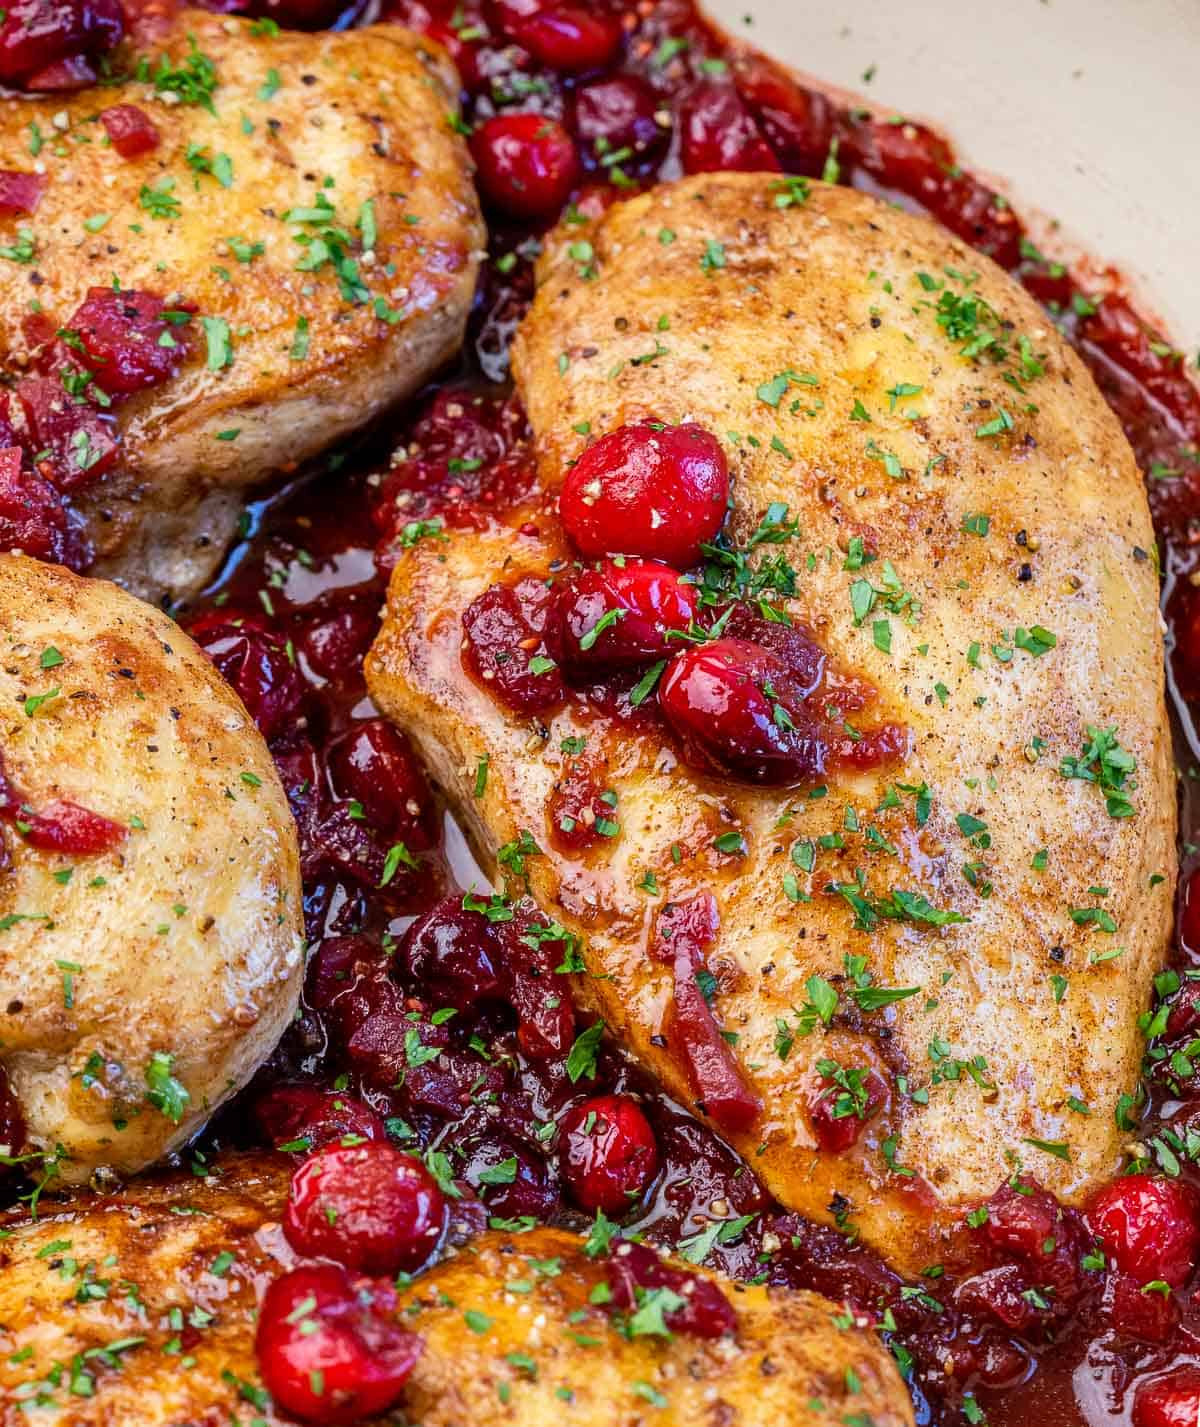 Cranberry roasted chicken topped with cranberries and fresh parsley.